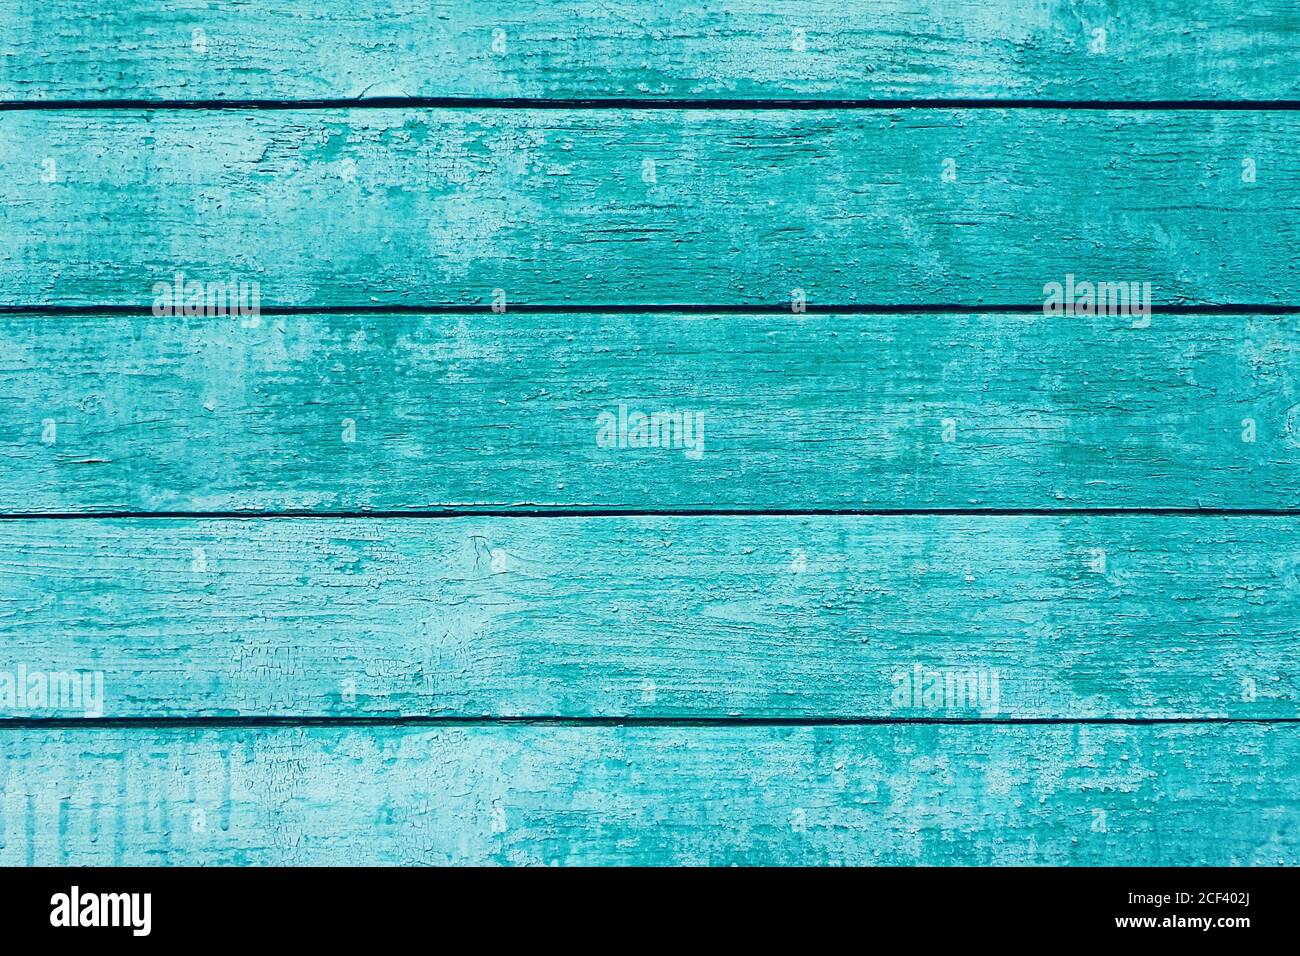 Turquoise shabby painted plank wall for background Stock Photo